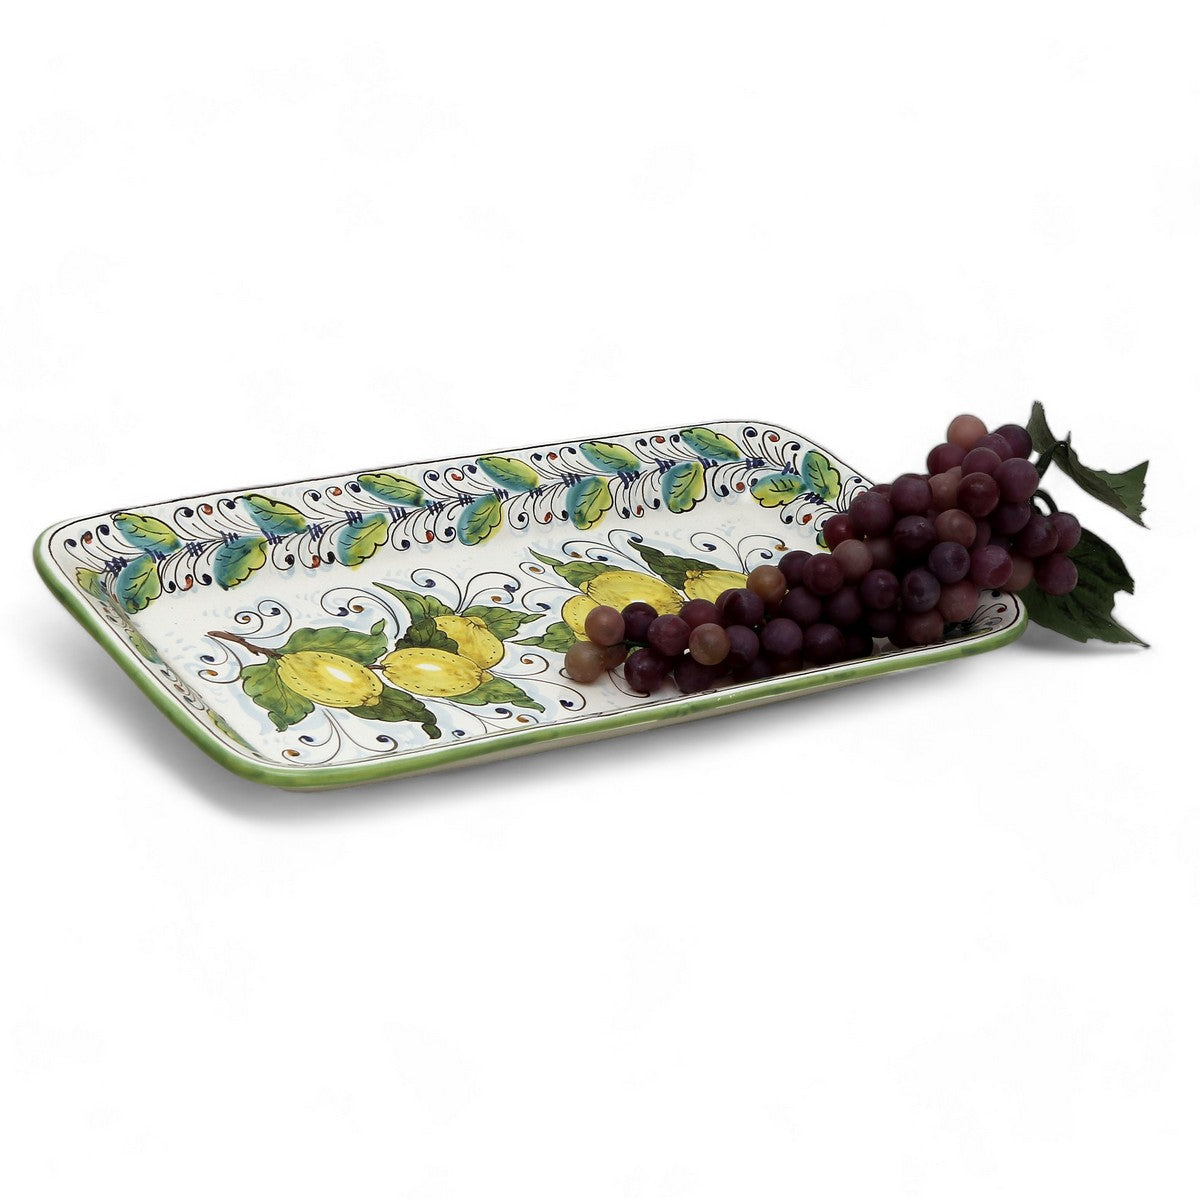 TUSCAN MAJOLICA: Rectangular Tray Platter with a Positano Lemon Design surrounded by green foliage.